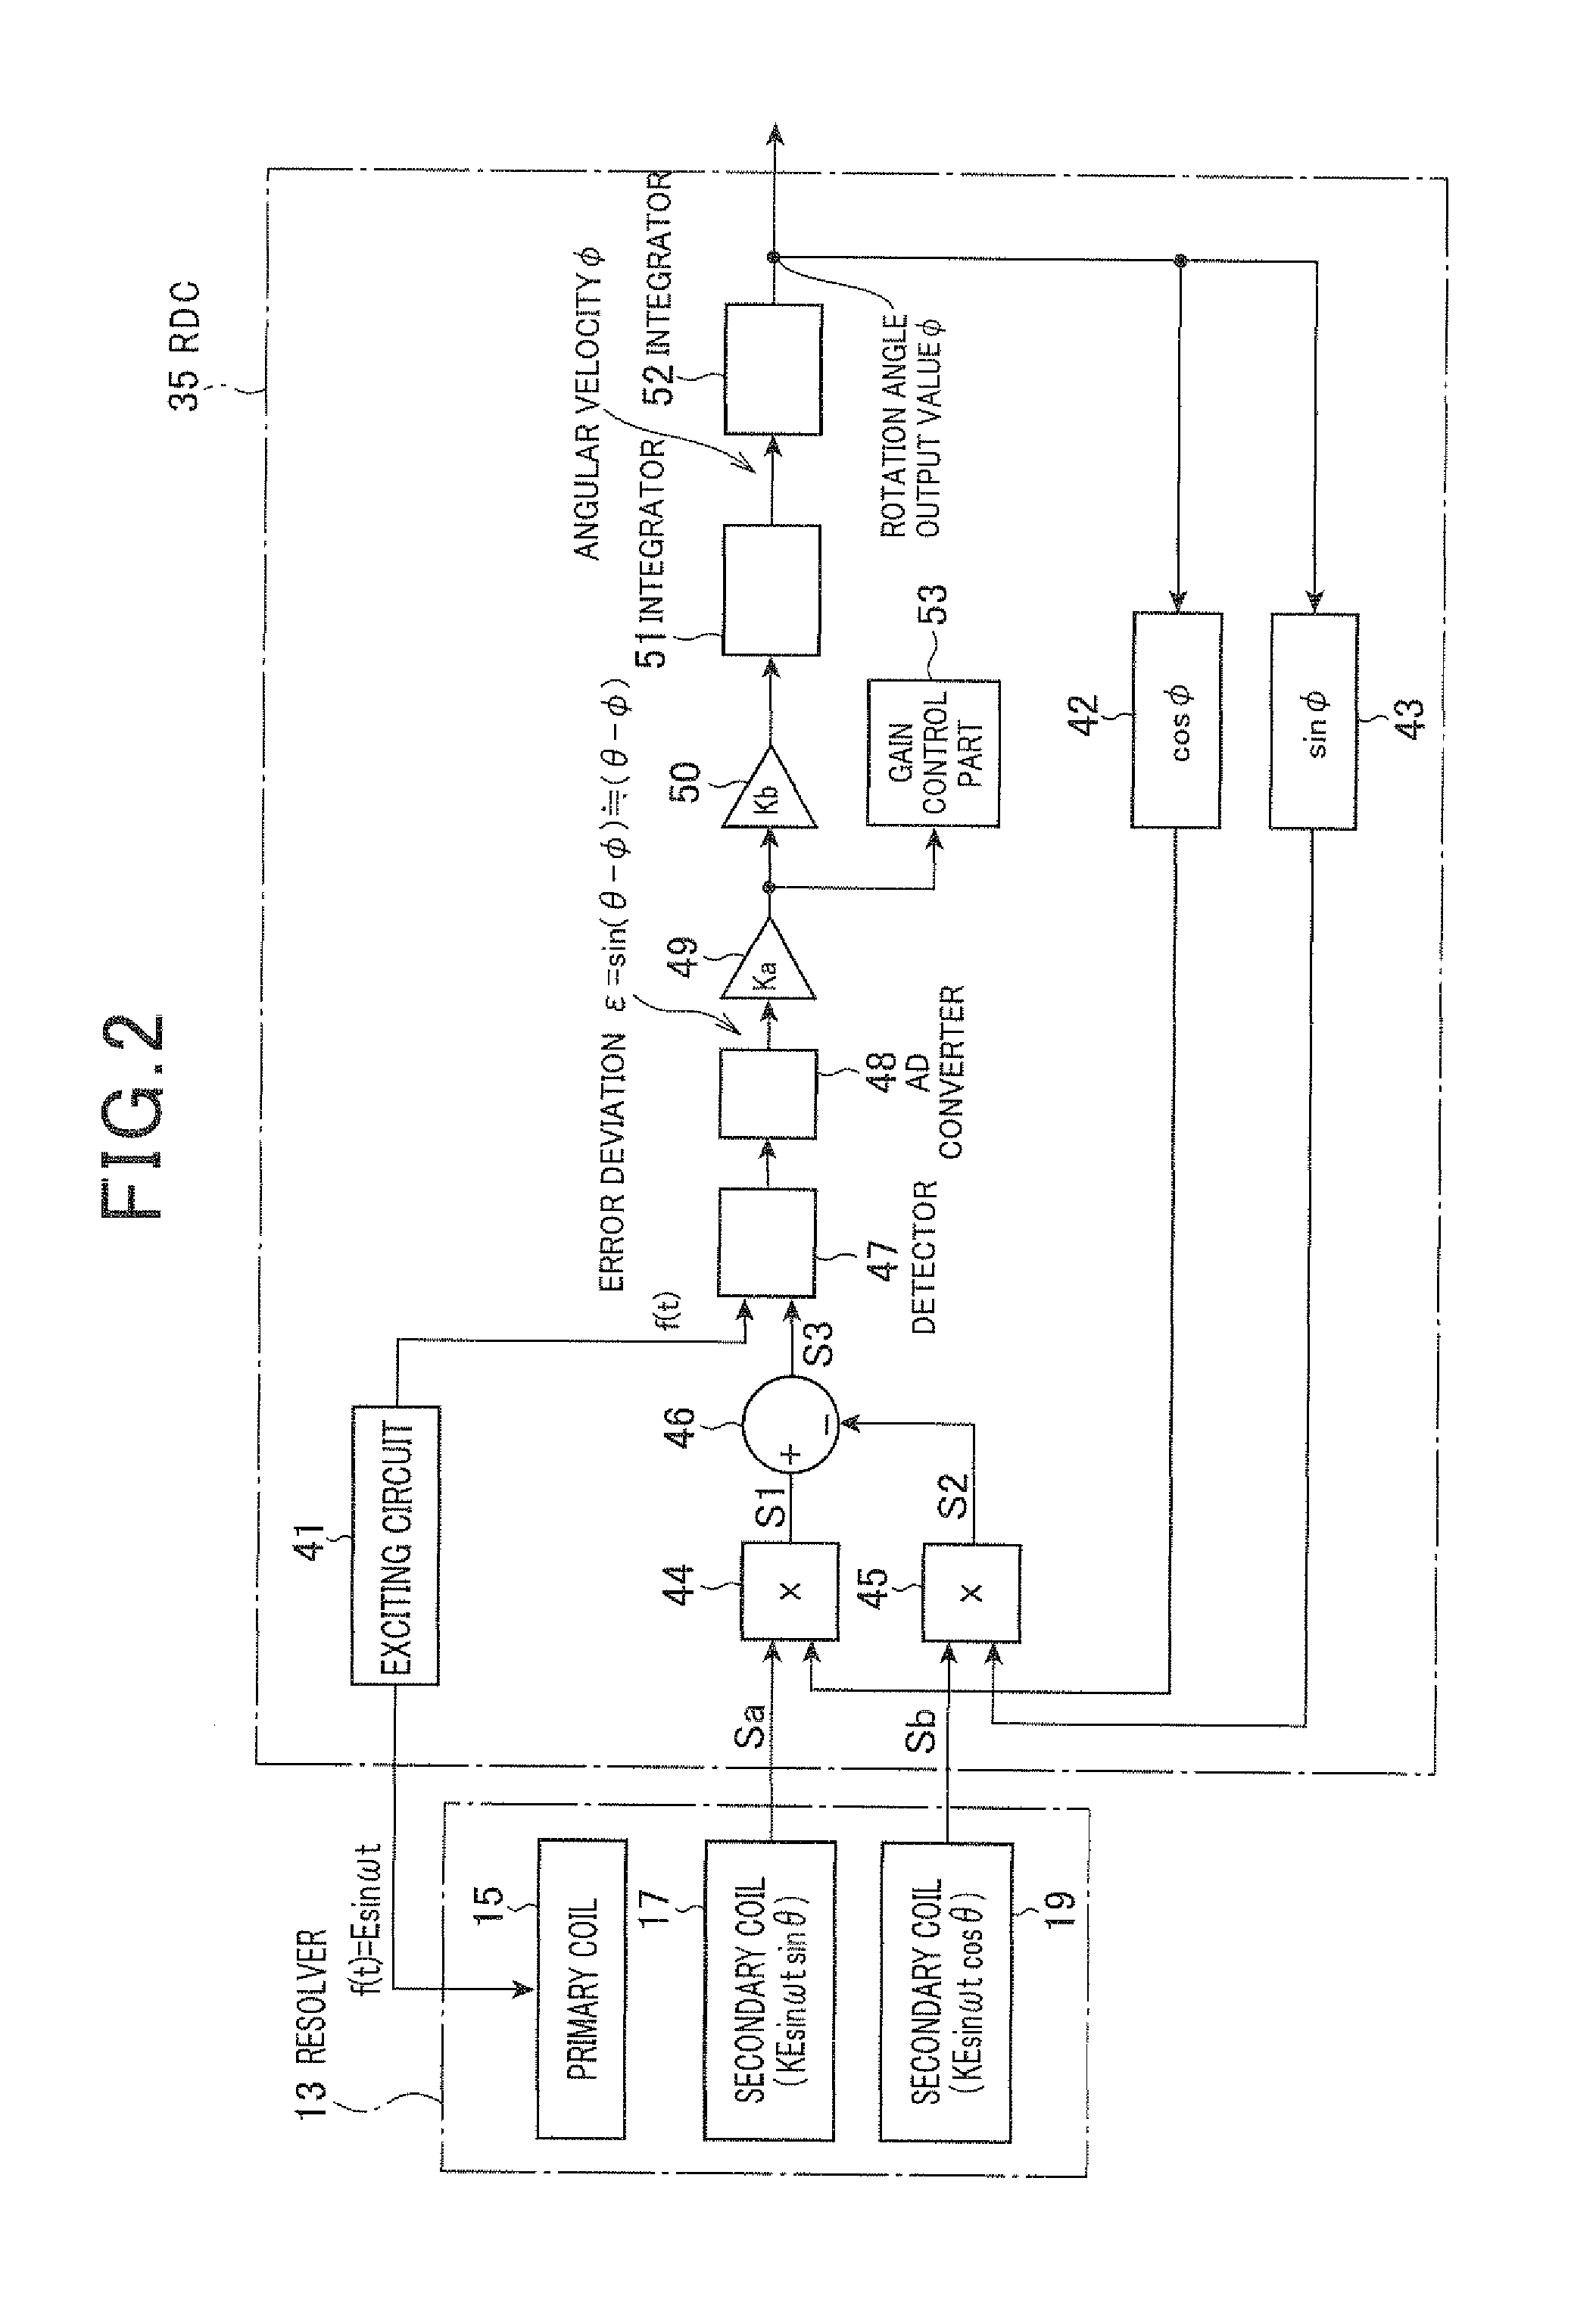 Control device for controlling travel motor of vehicle